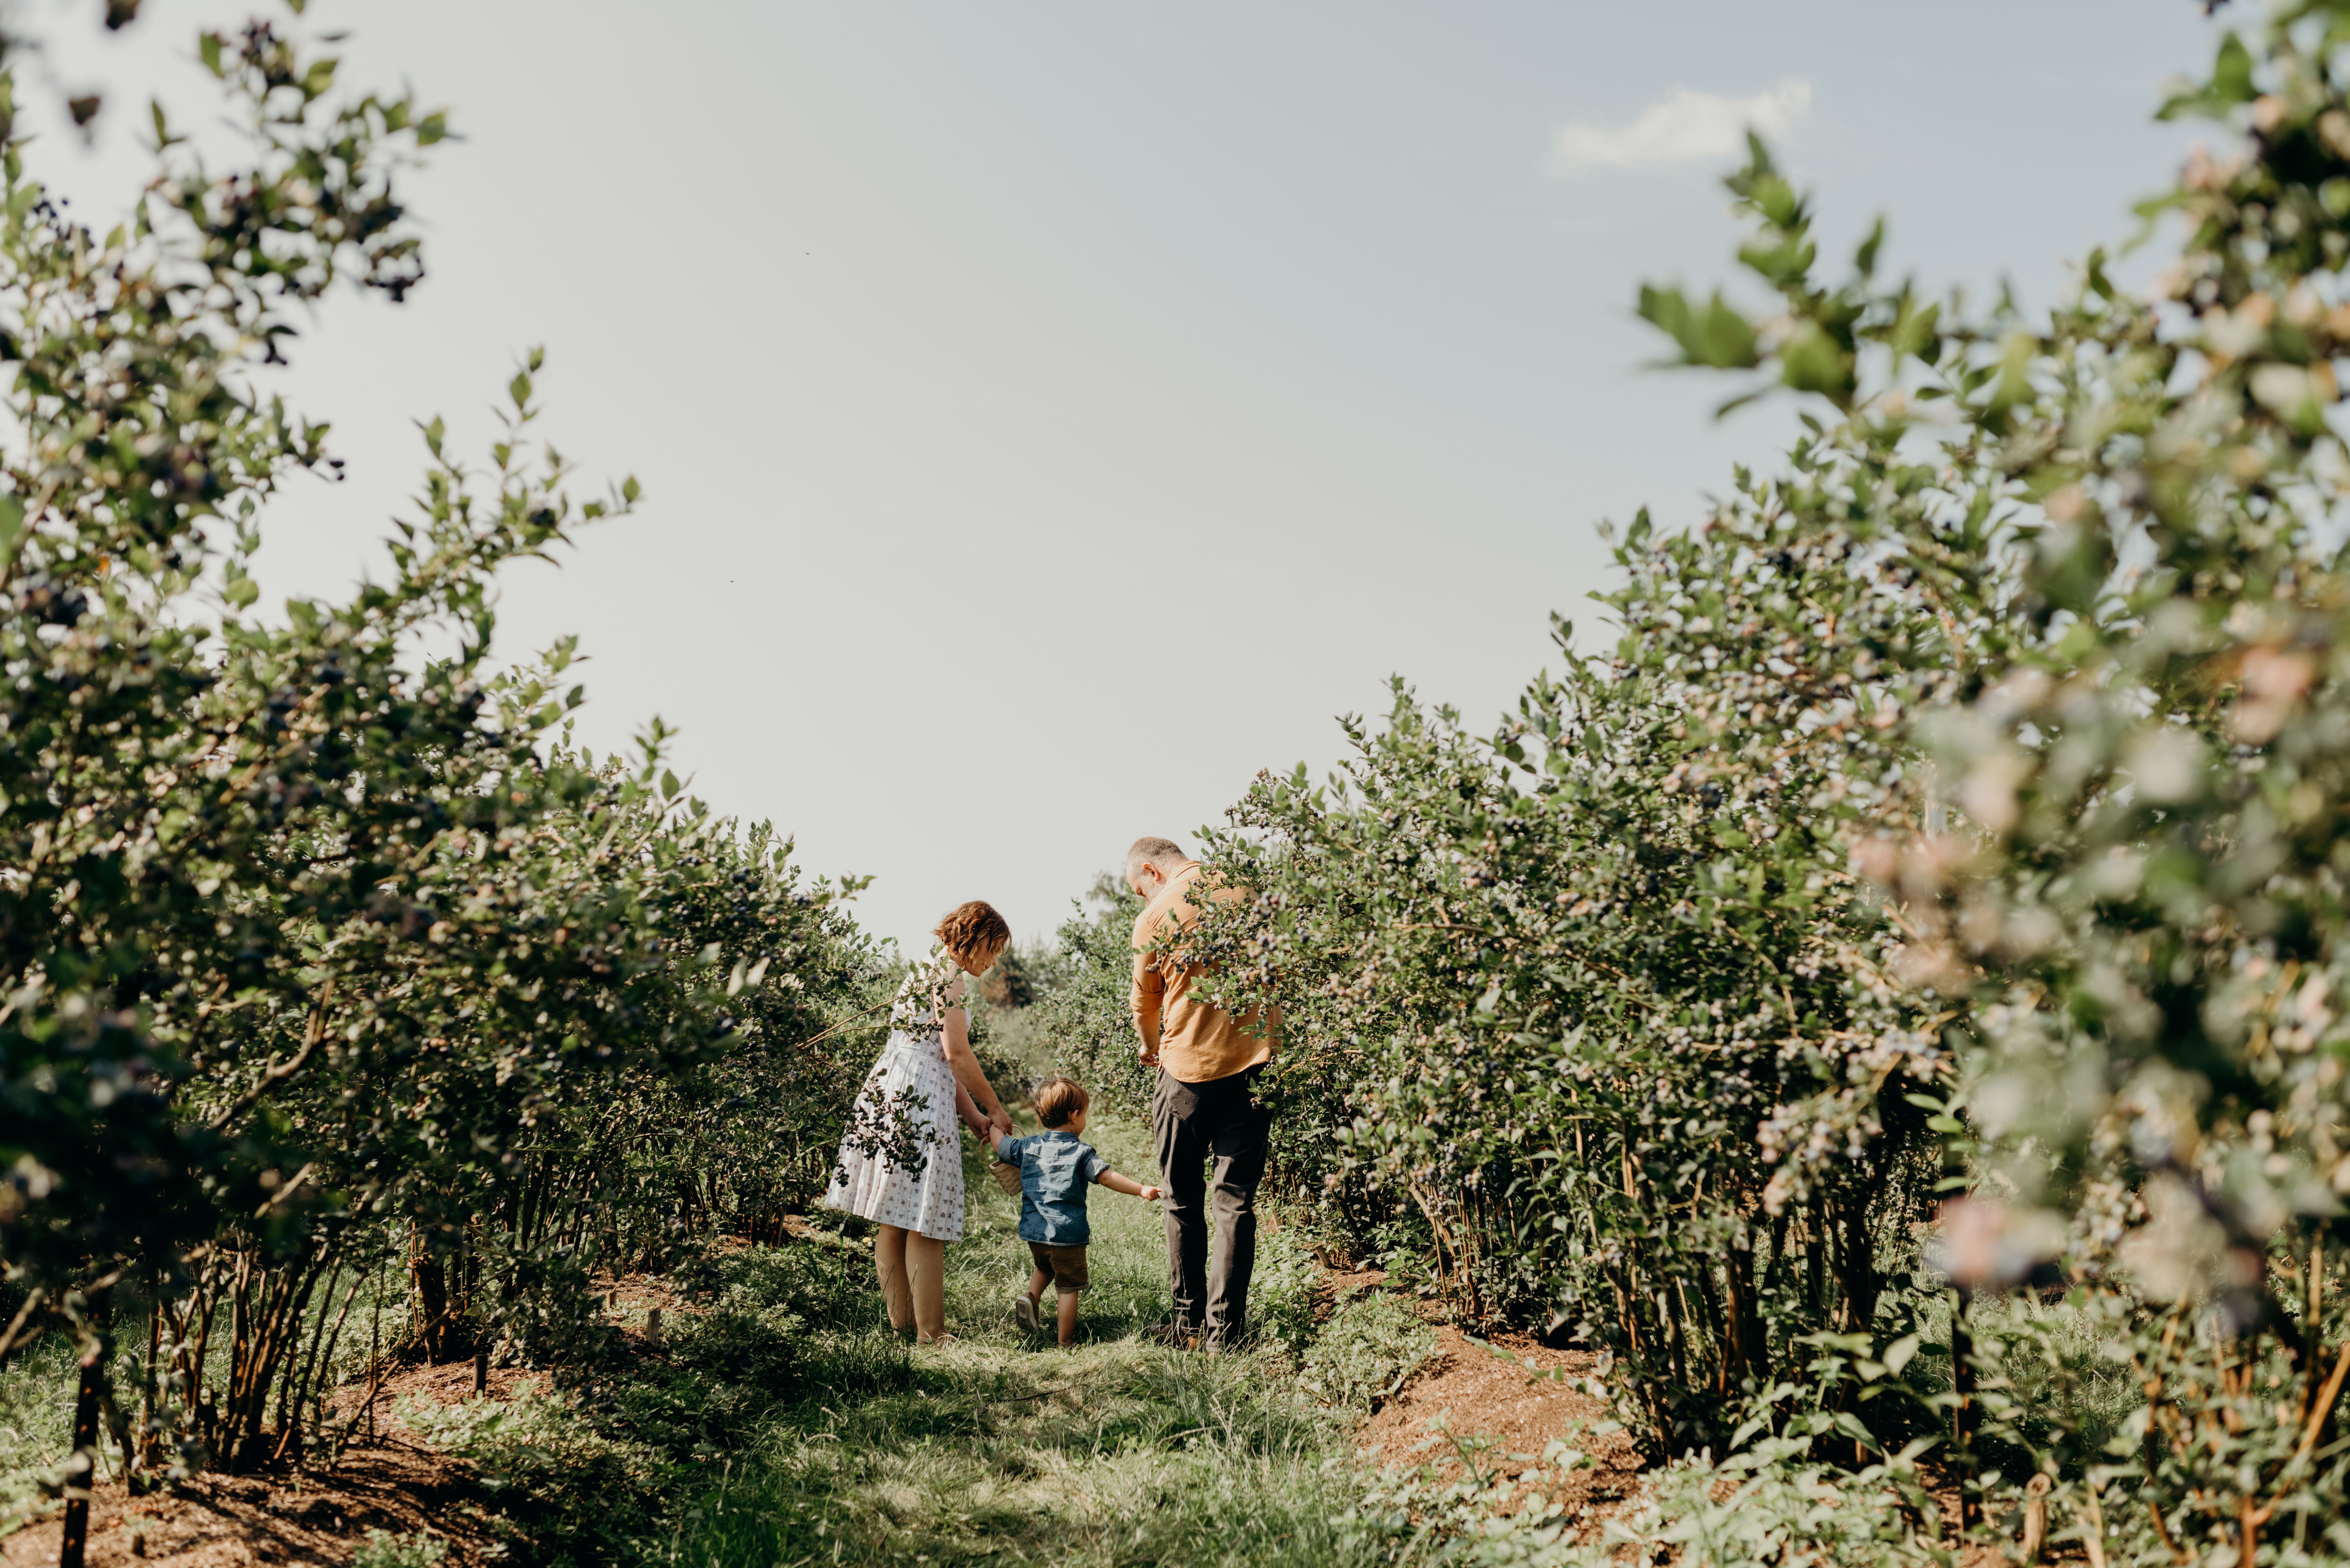 Candid family portrait photography at bow hill blueberry farm